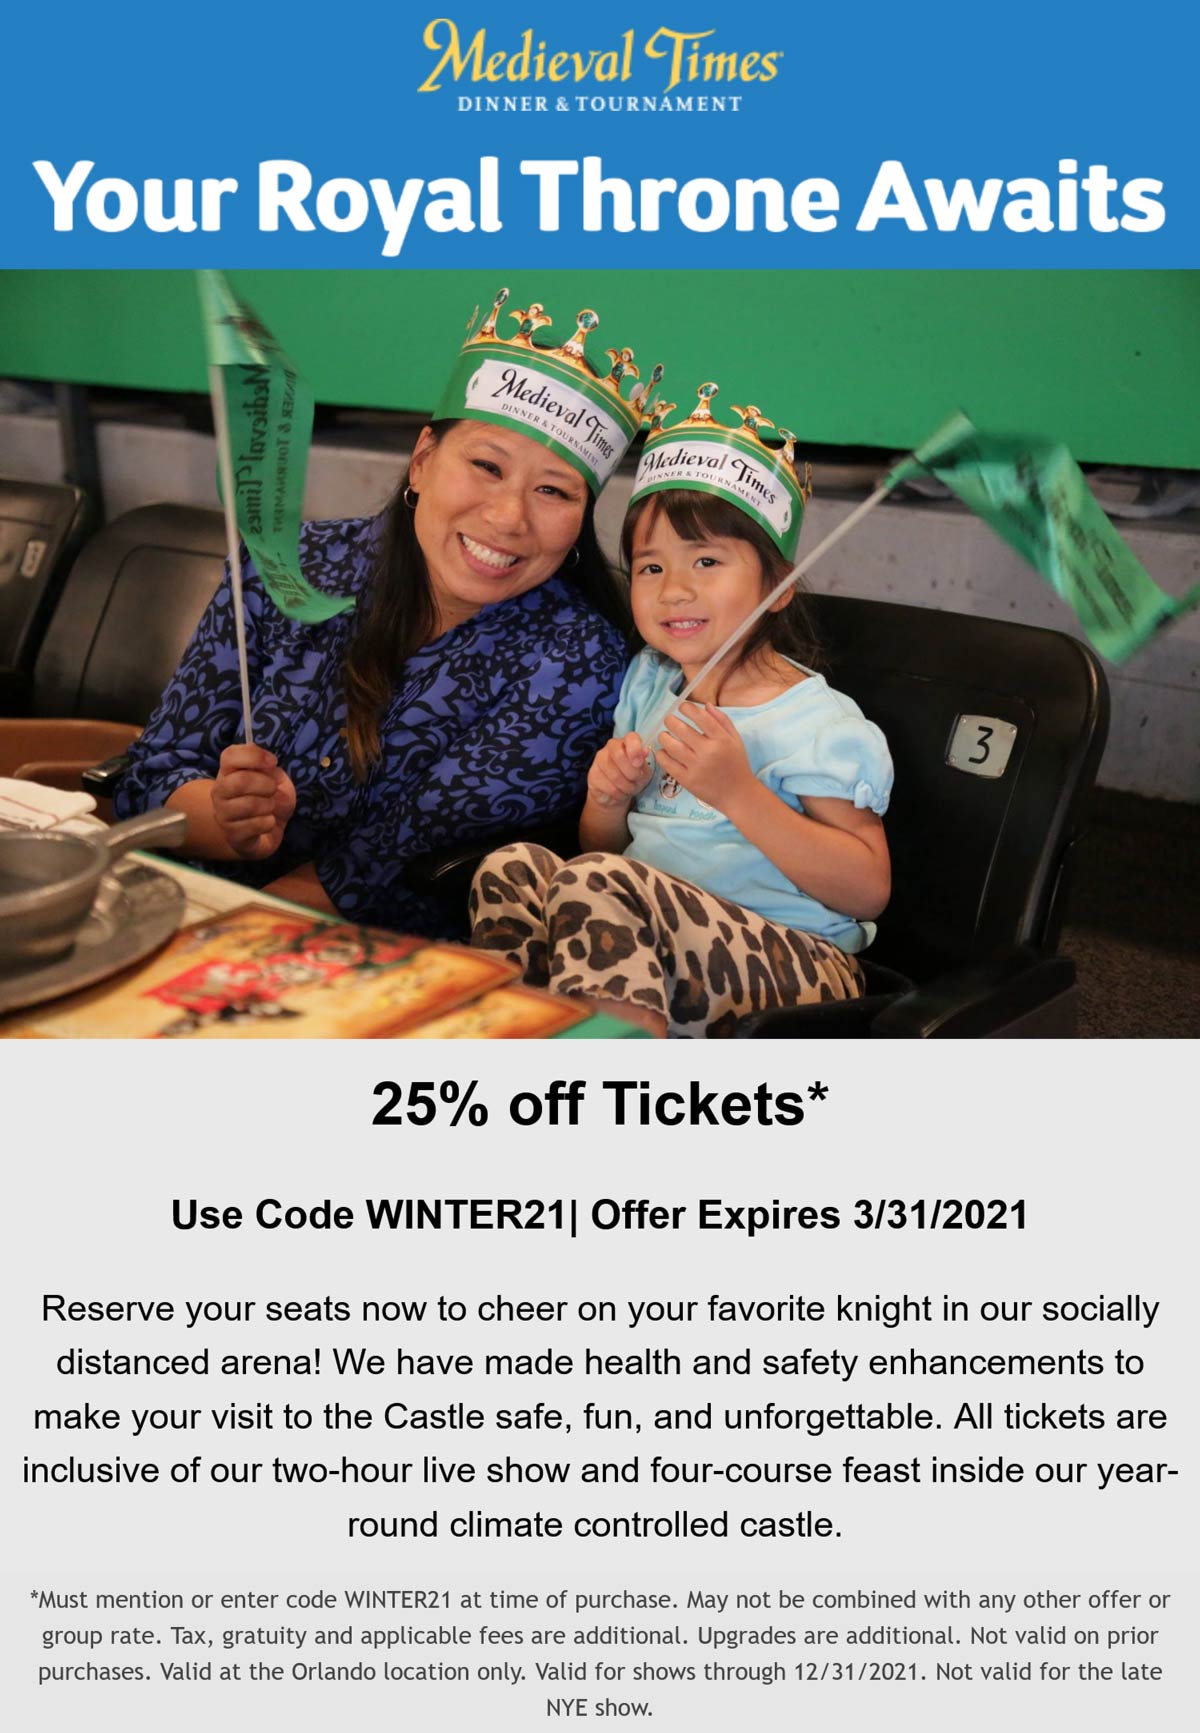 Medieval Times restaurants Coupon  25% off at Medieval Times Dinner & Tournament via promo code WINTER21 #medievaltimes 